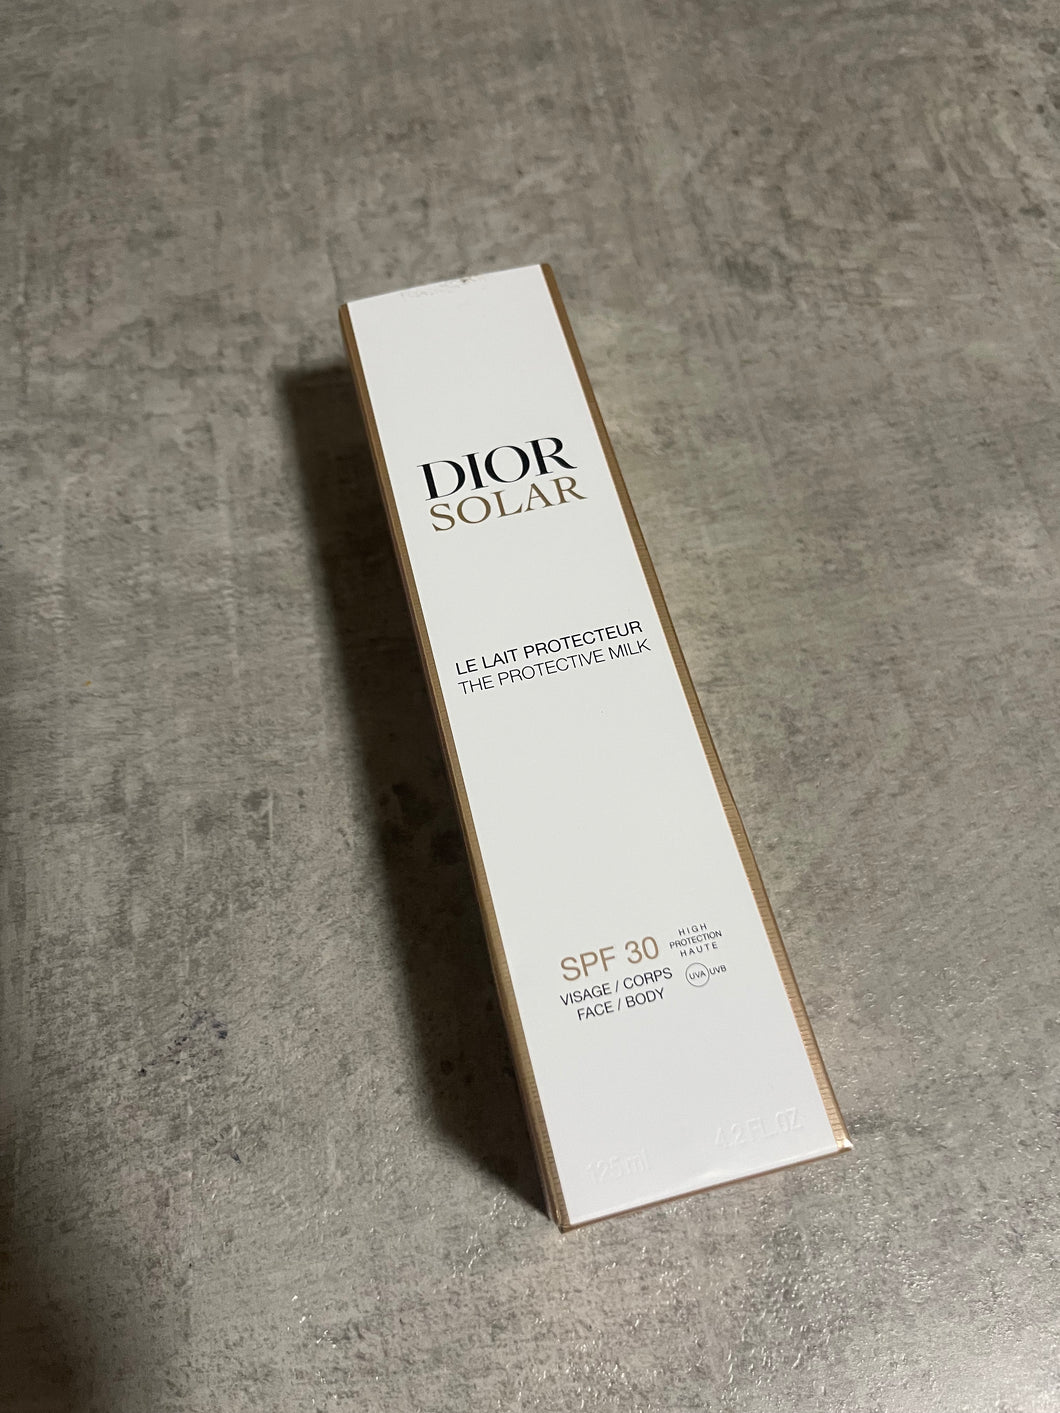 DIOR SOLAR THE PROTECTIVE MILK FOR FACE AND BODY SPF 30